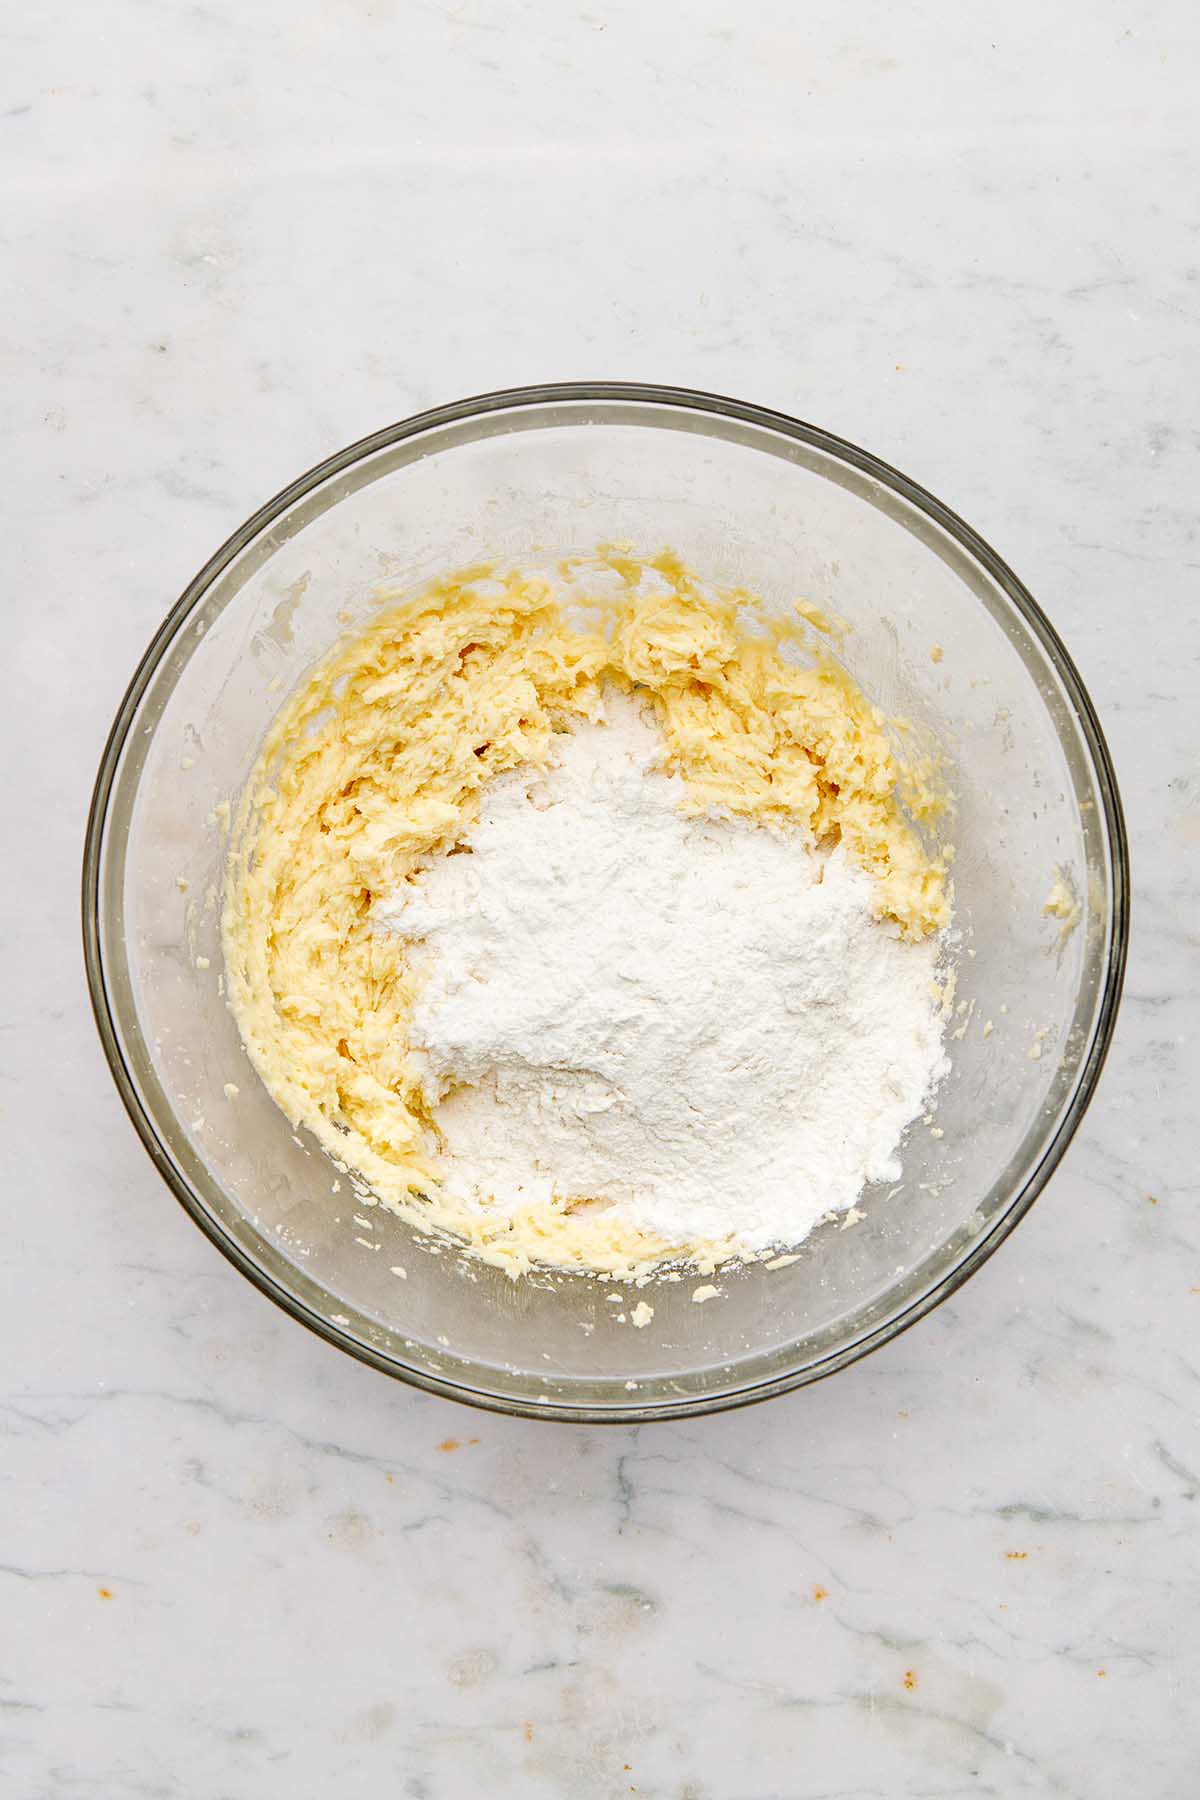 Beaten butter and sugar in a glass bowl with a small pile of flour on top.